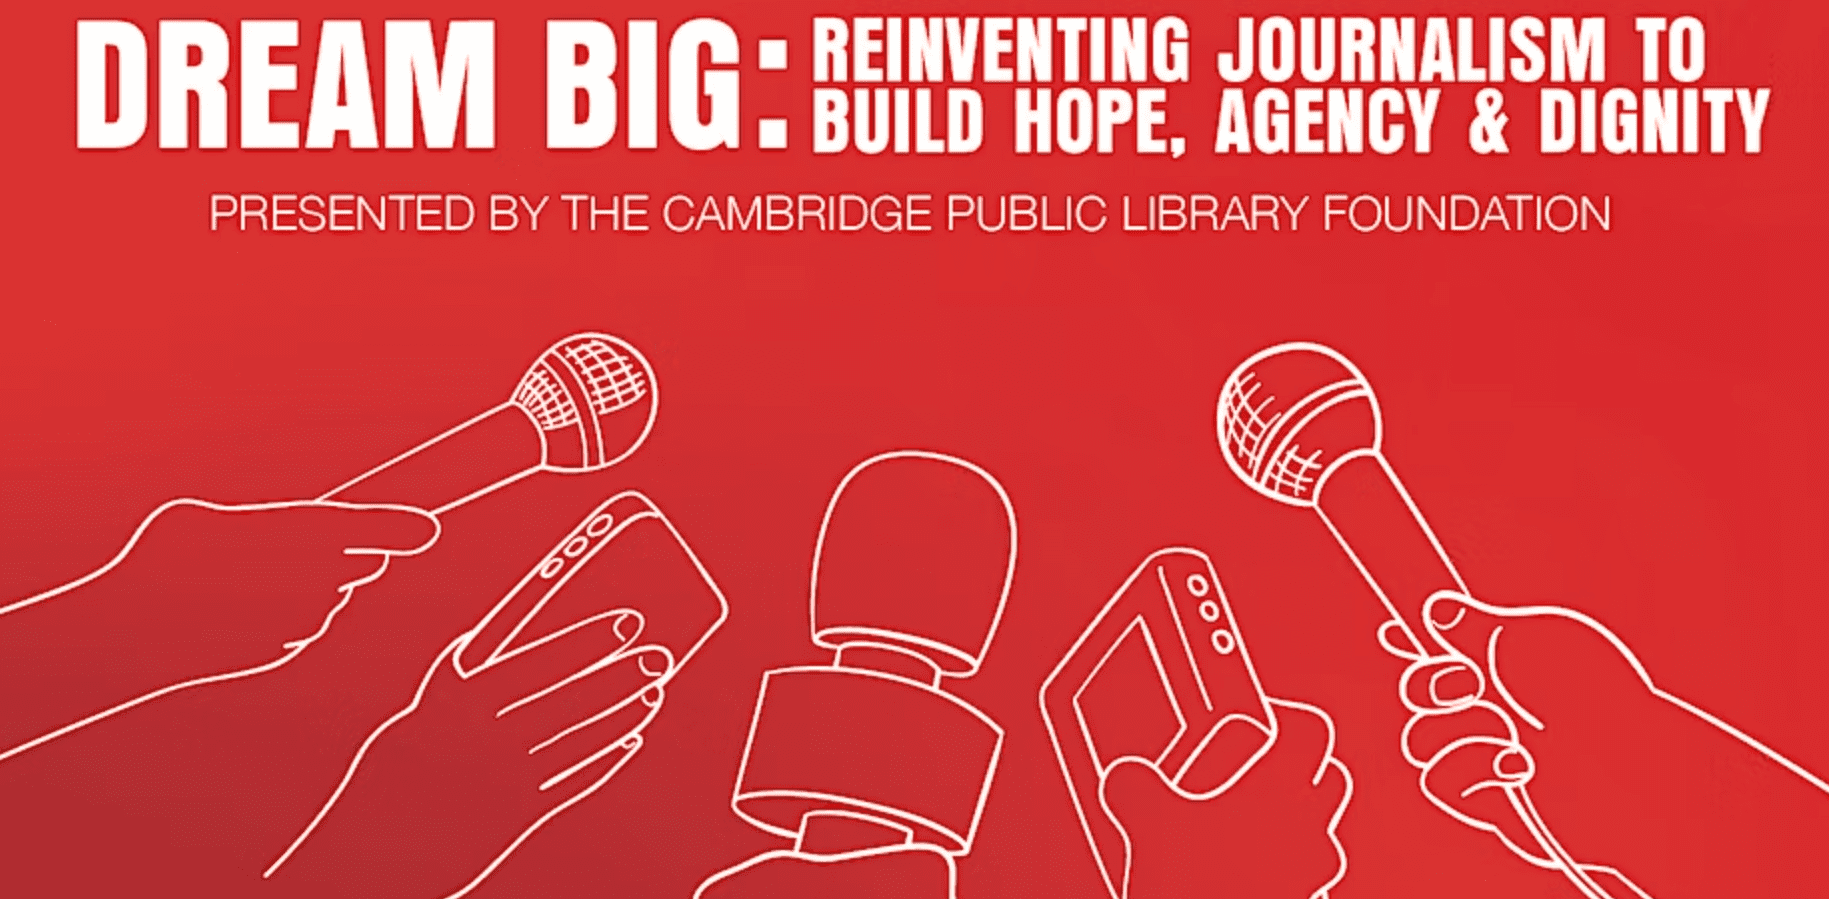 Dream Big: Reinventing Journalism to Build Hope, Agency & Dignity